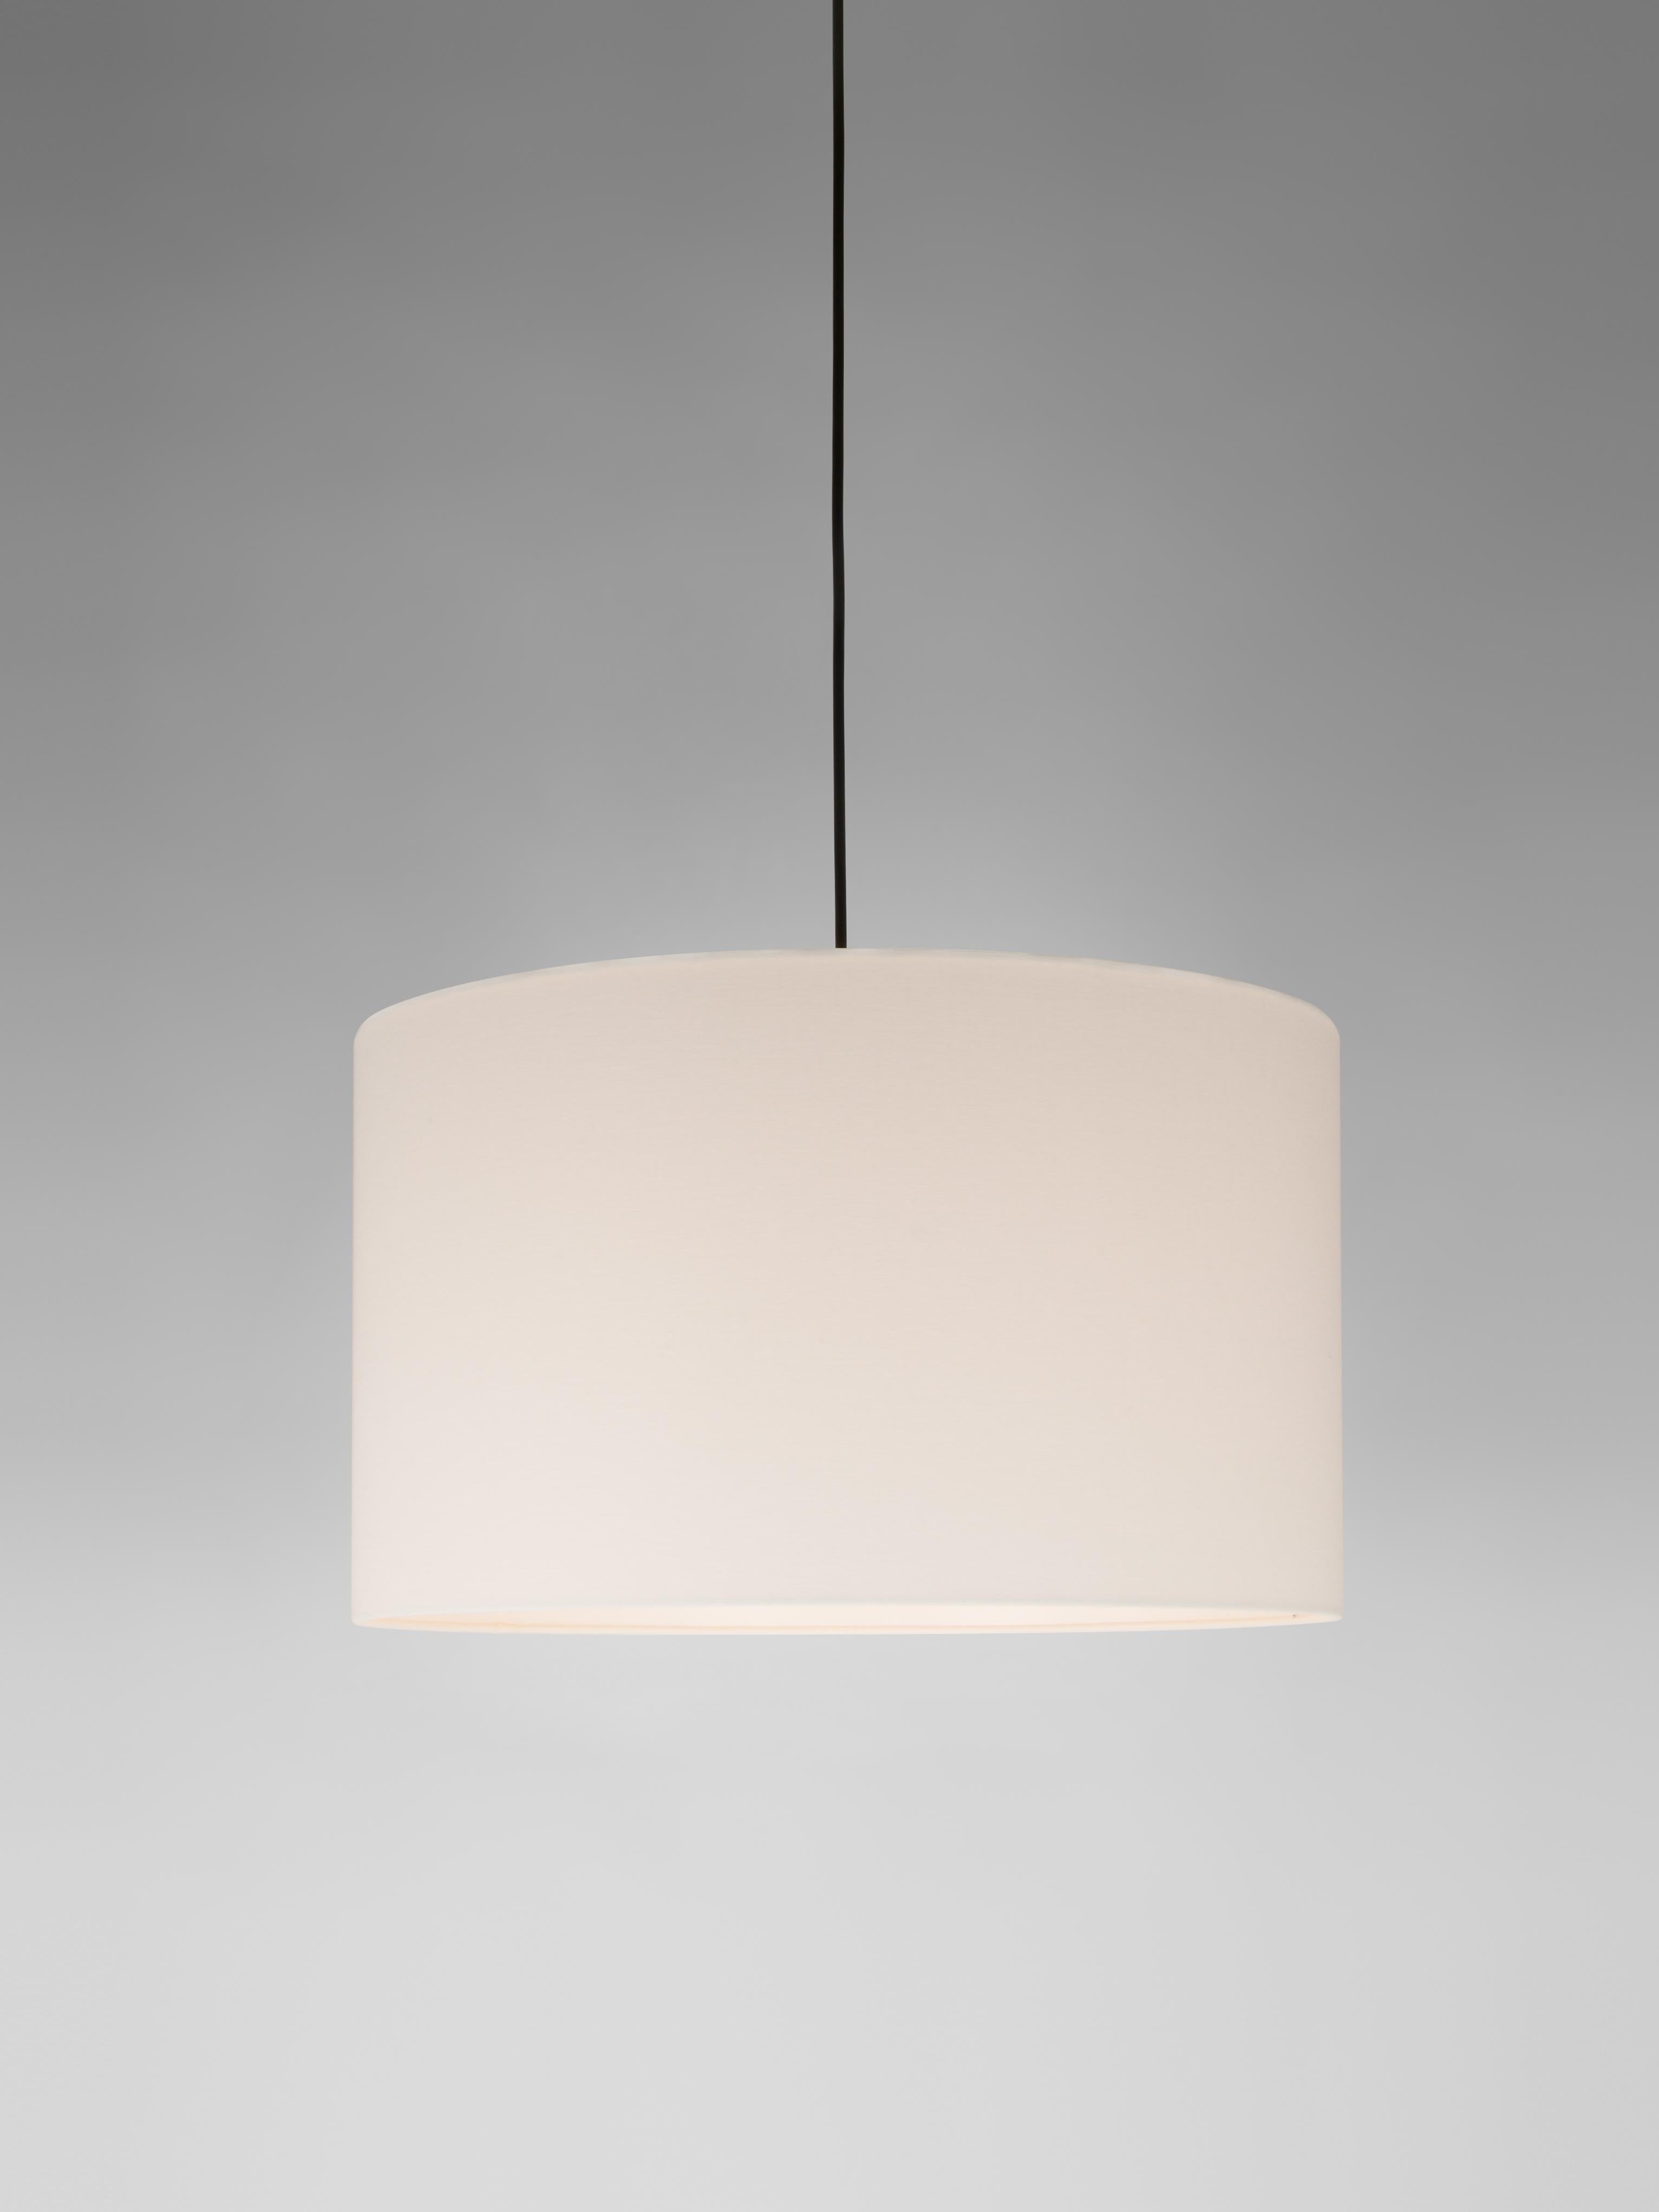 White Sísísí Cilíndricas GT2 pendant lamp by Santa & Cole
Dimensions: D 45 x H 27 cm
Materials: Metal, linen.
Available in other colors.
Also available in two lights version.

Cylindrical in shape, there are two sizes: the PT2 being the small